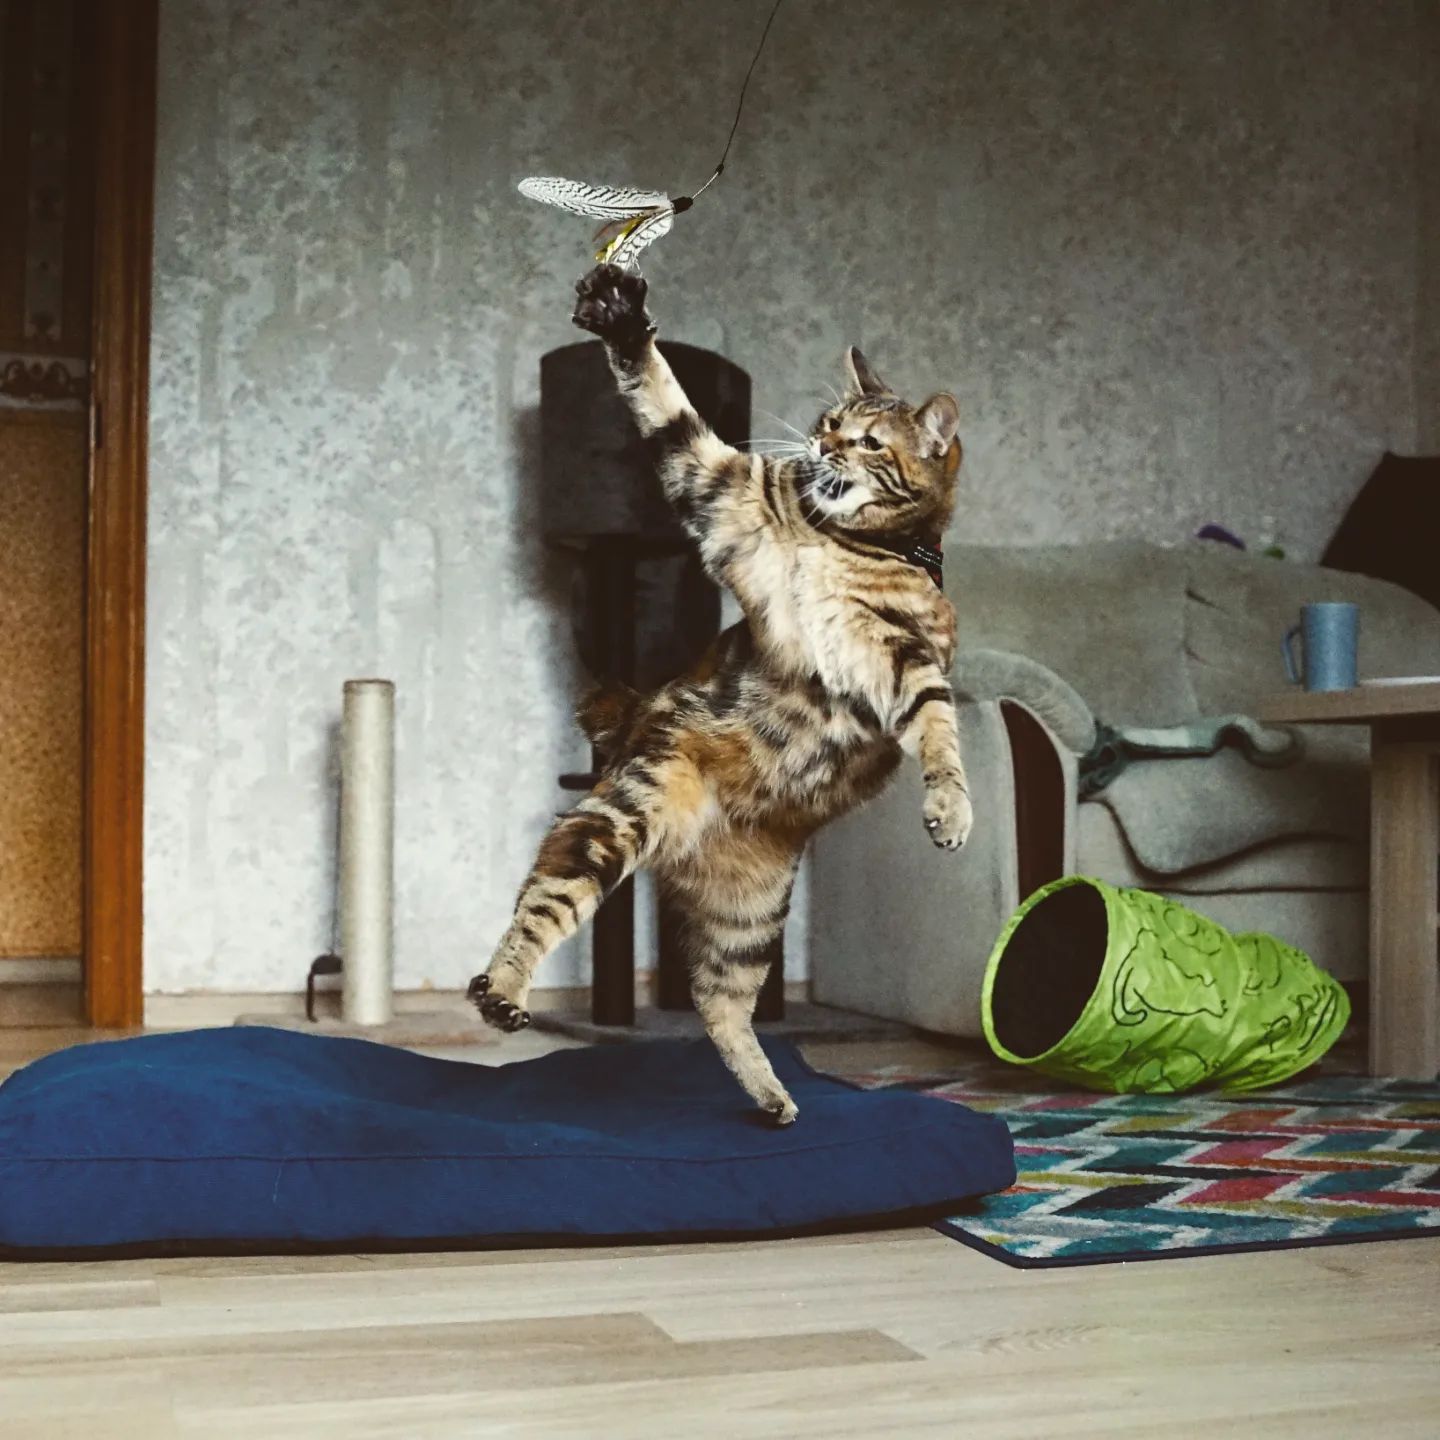 cat grabbing toy from mid-air